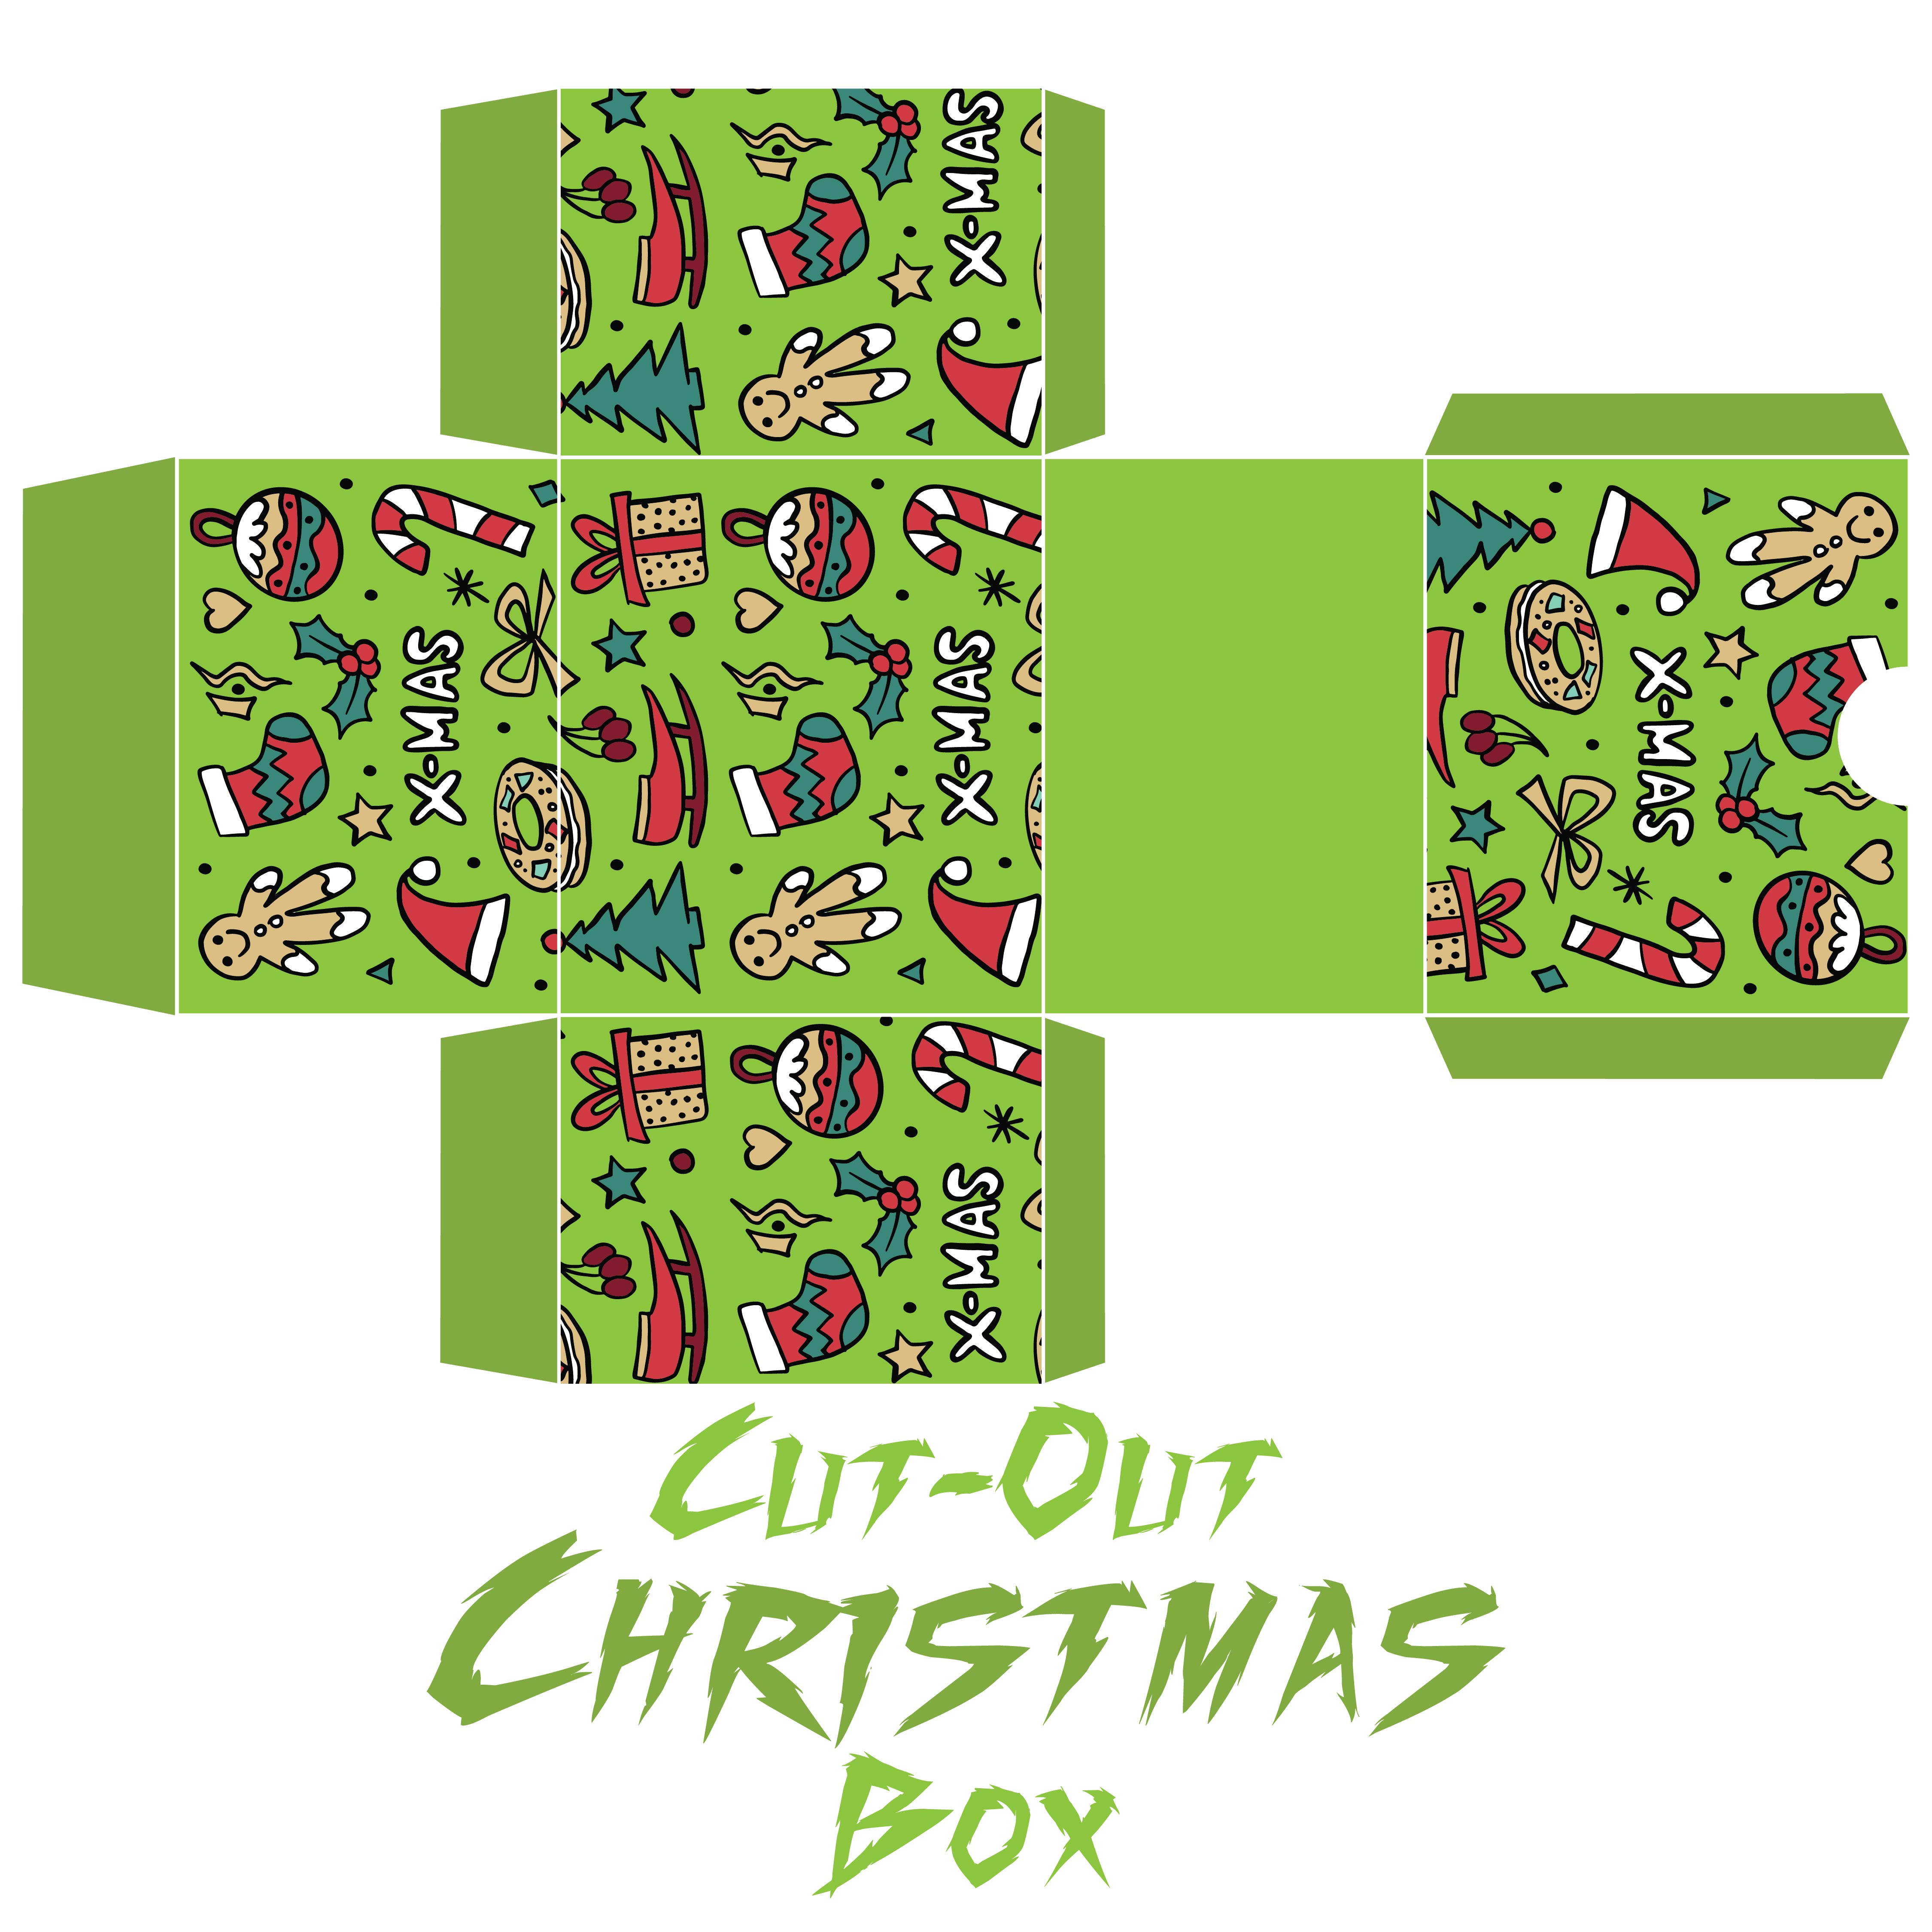 7 Best Images of Free Printable Christmas Gift Box Template Free